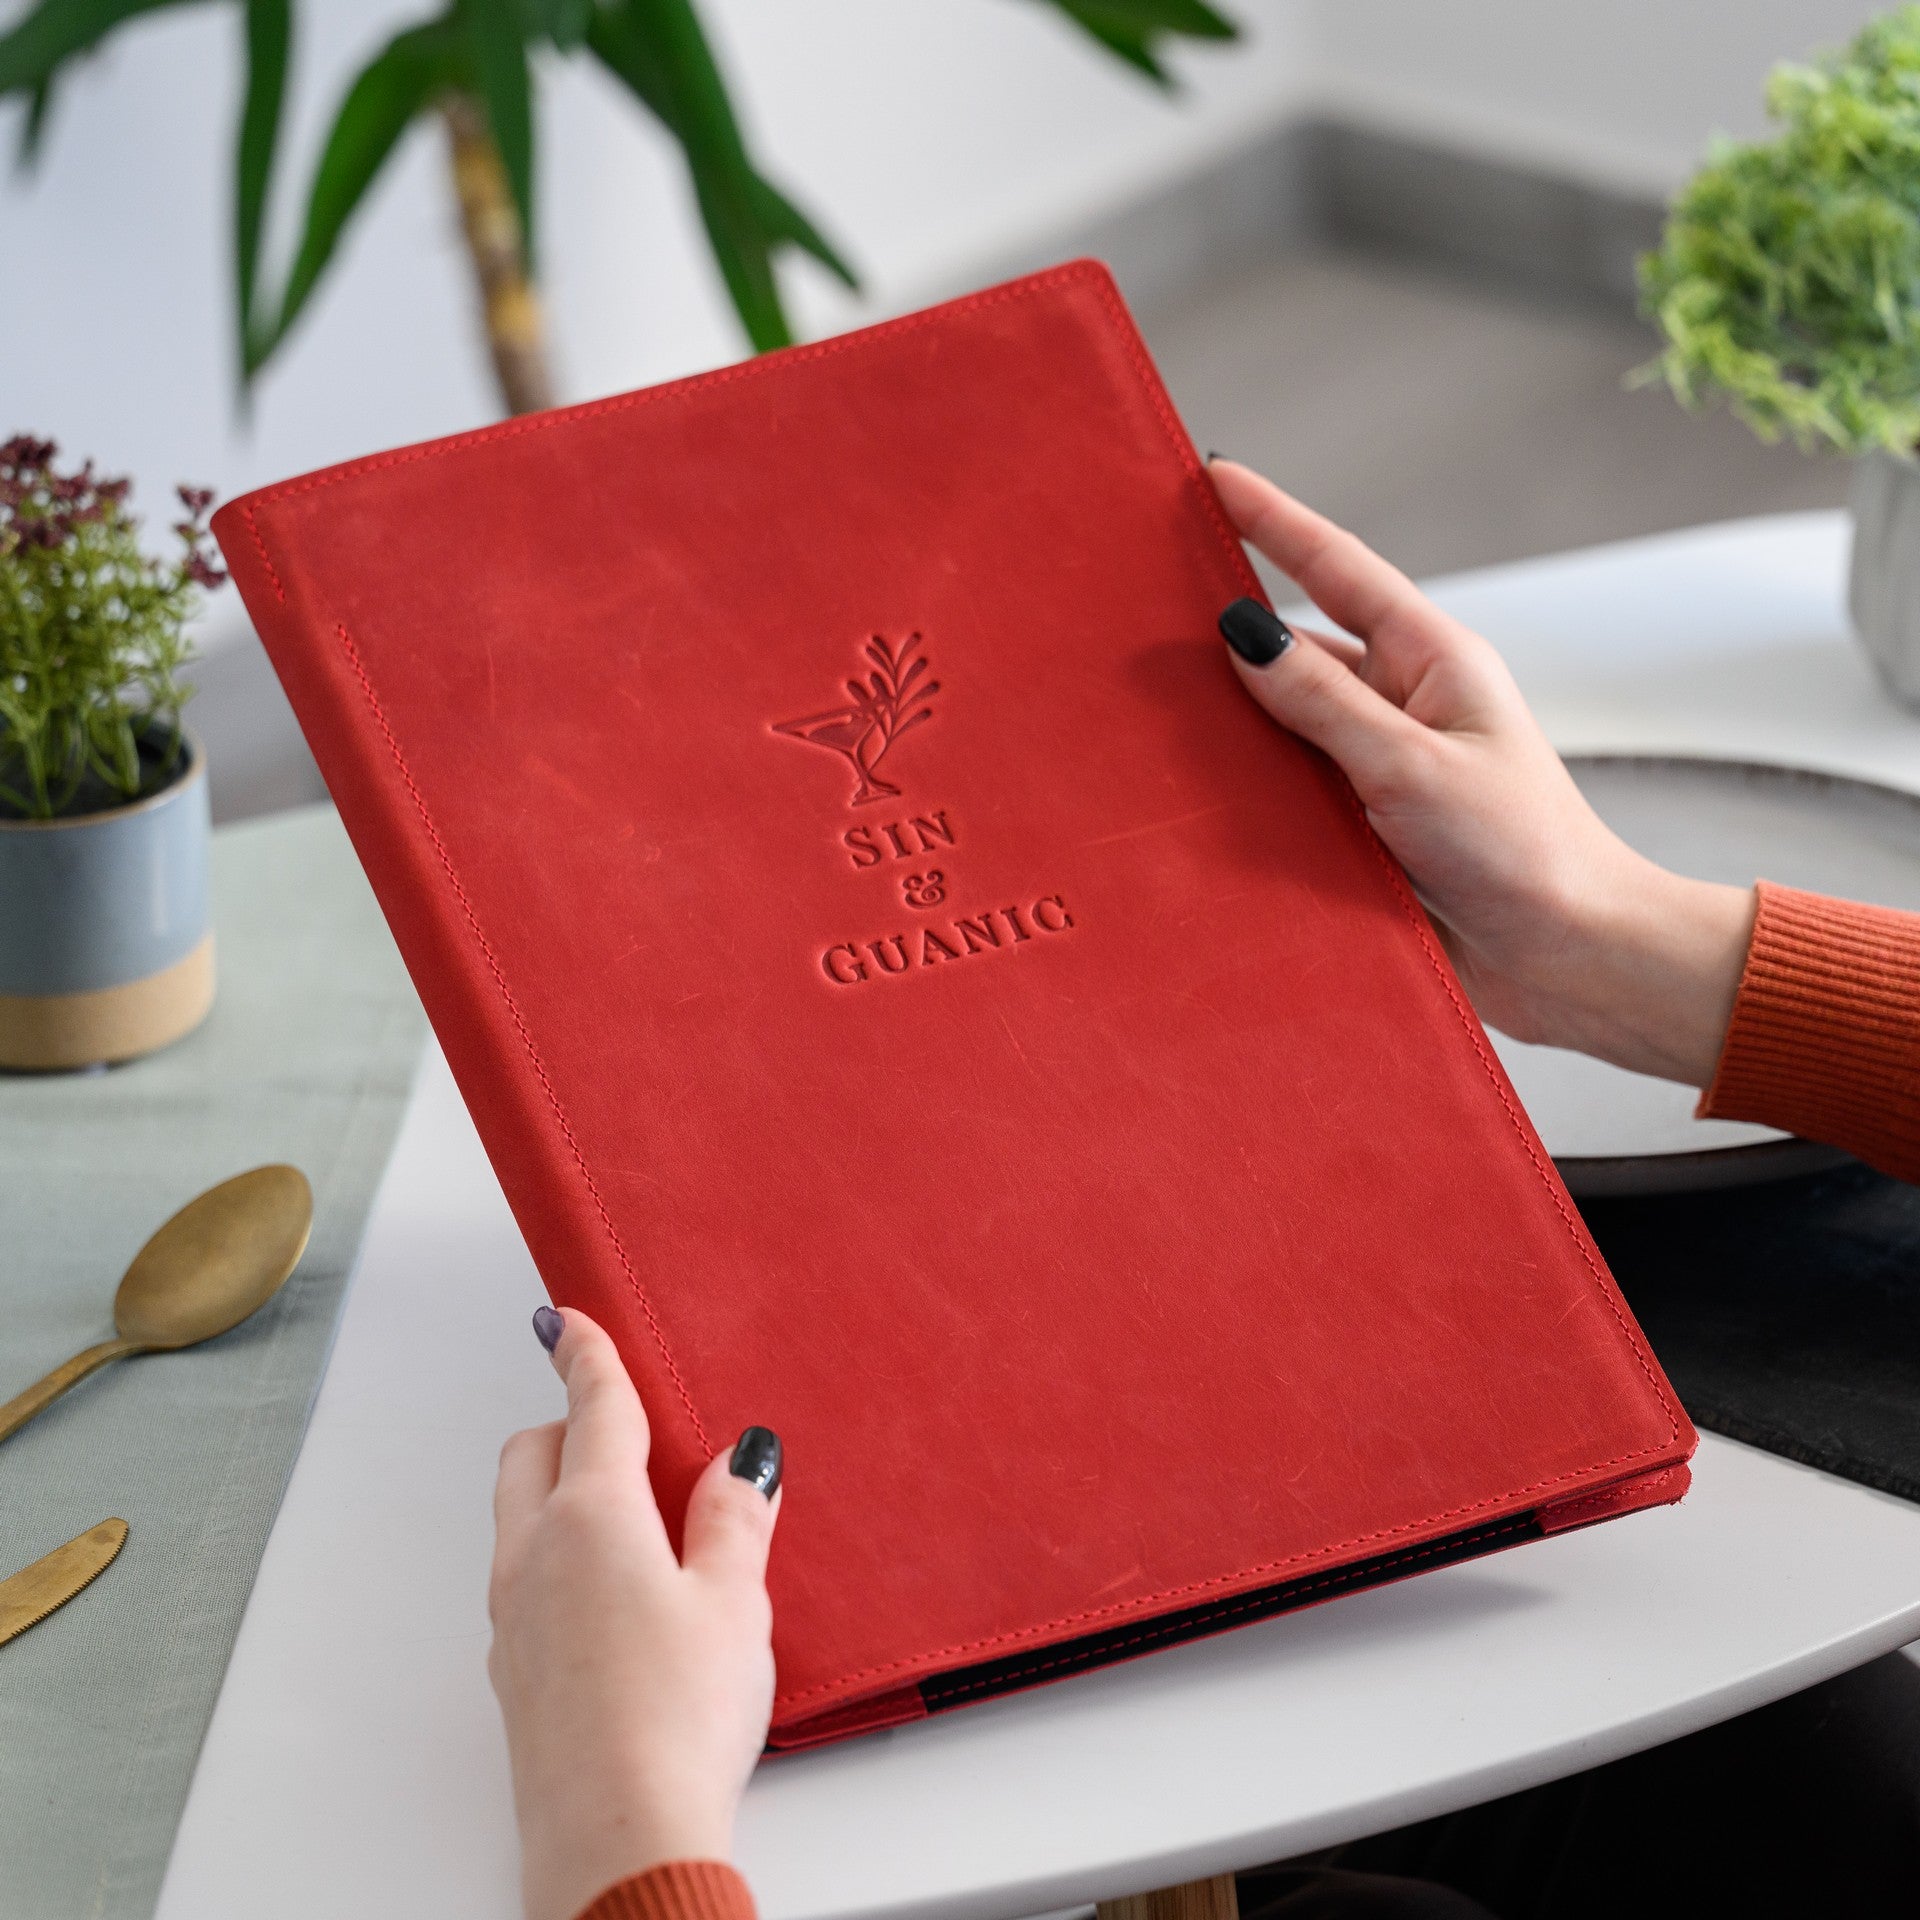 Sleek Leather Menu Clipboard, offering a sophisticated display for your menu items.